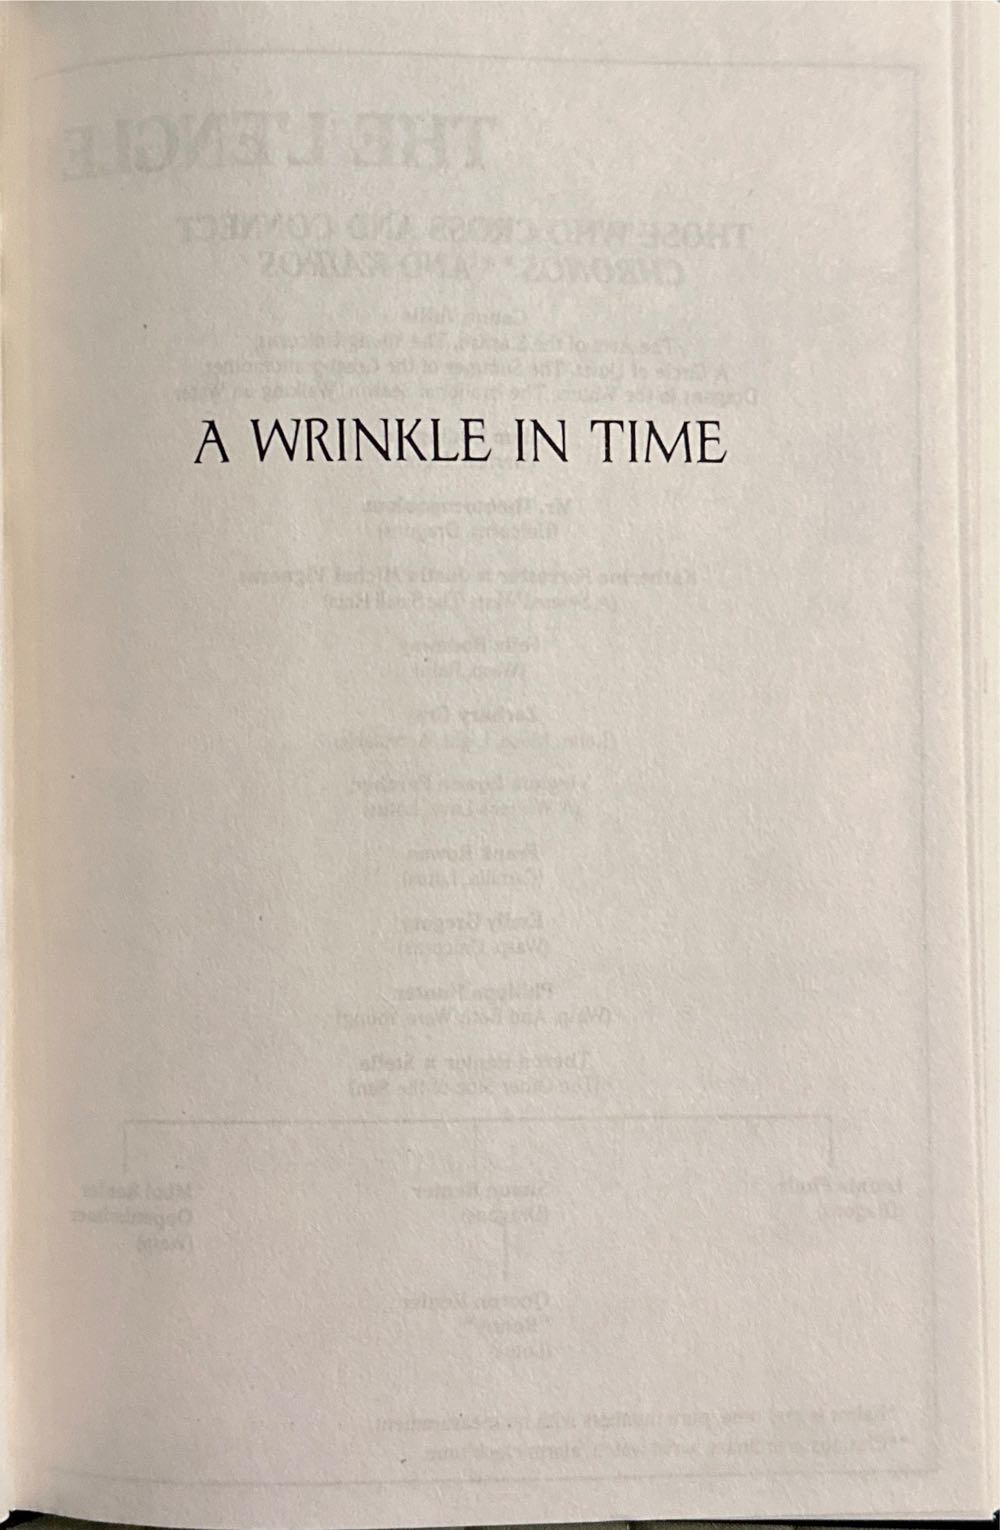 A Wrinkle in Time - Madeleine L’Engle (Macmillan - Hardcover) book collectible [Barcode 9780374386139] - Main Image 4